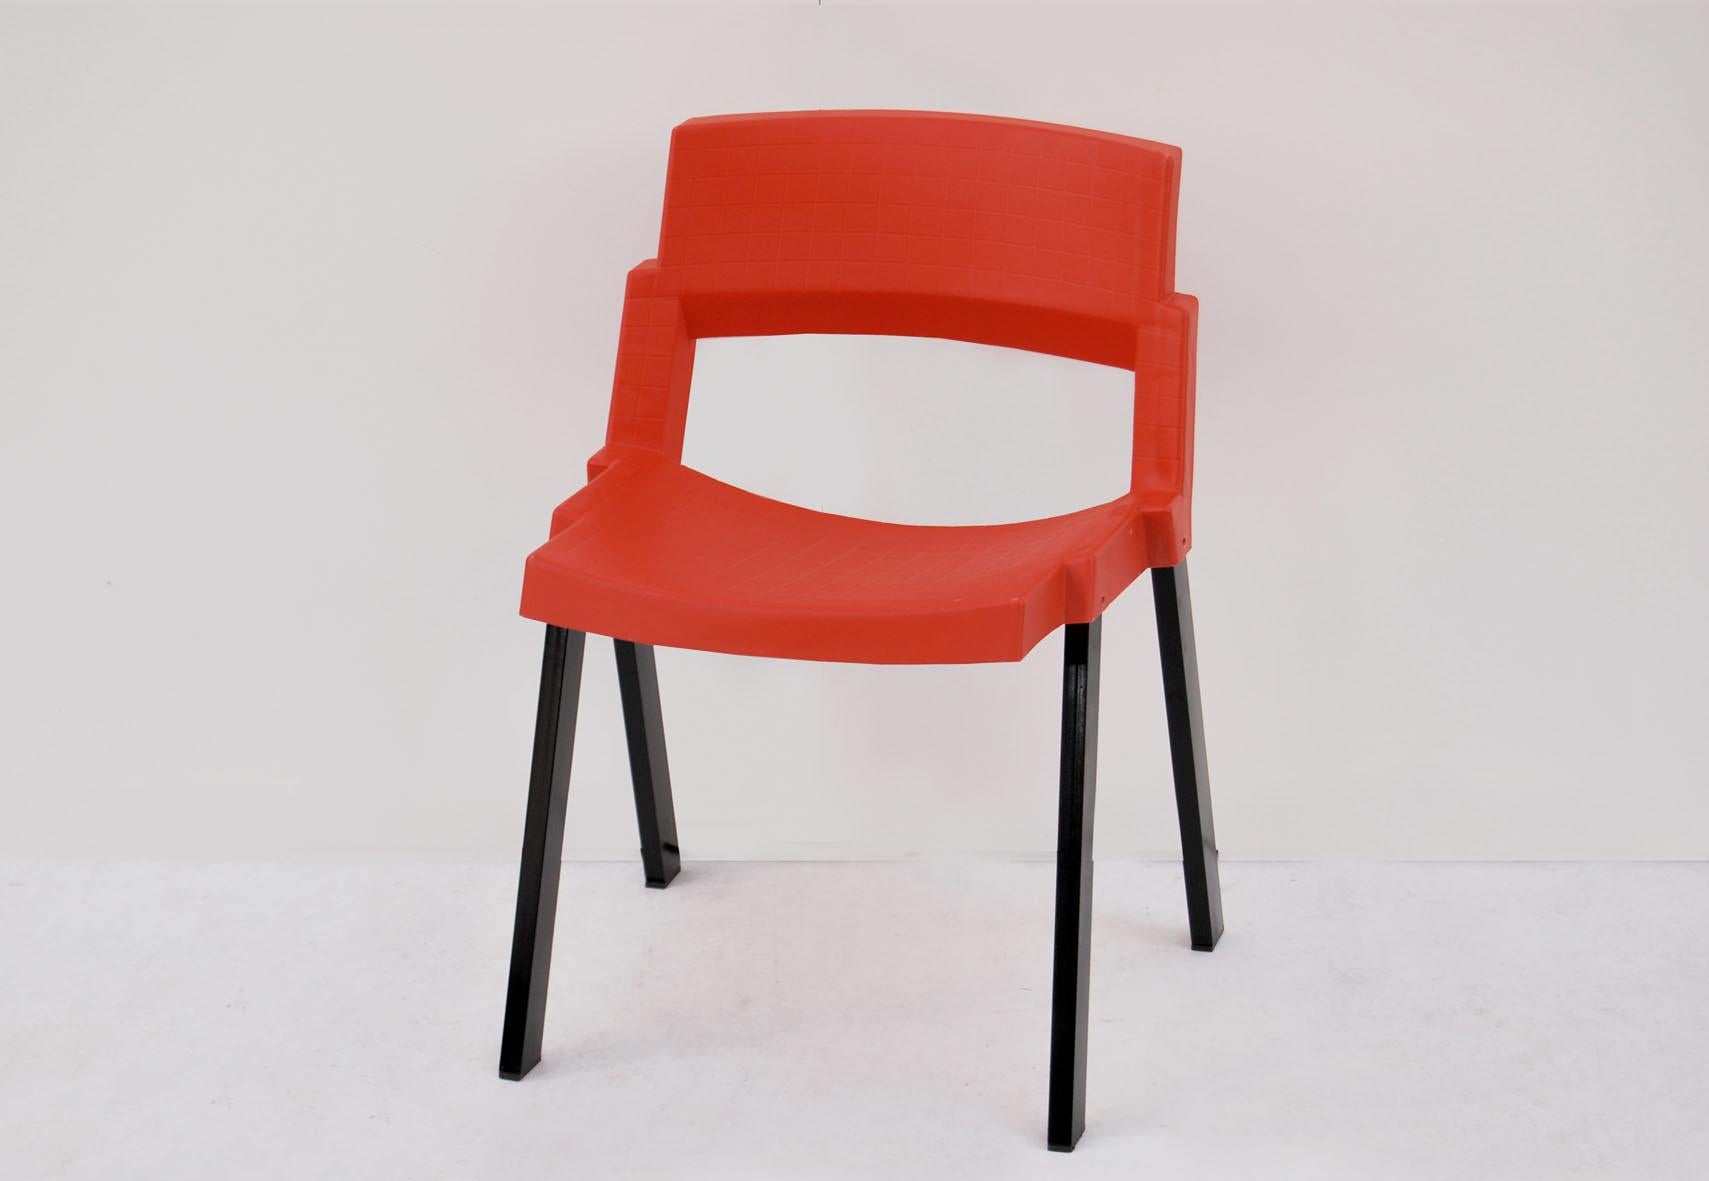 Six red and black City dining chairs by Lucci & Orlandini for Lamm, Made in Italy, 1980. 
They are made of red-colored polypropylene for the seat and back, while the legs are made of black painted metal. The chair is compact with a modern design,